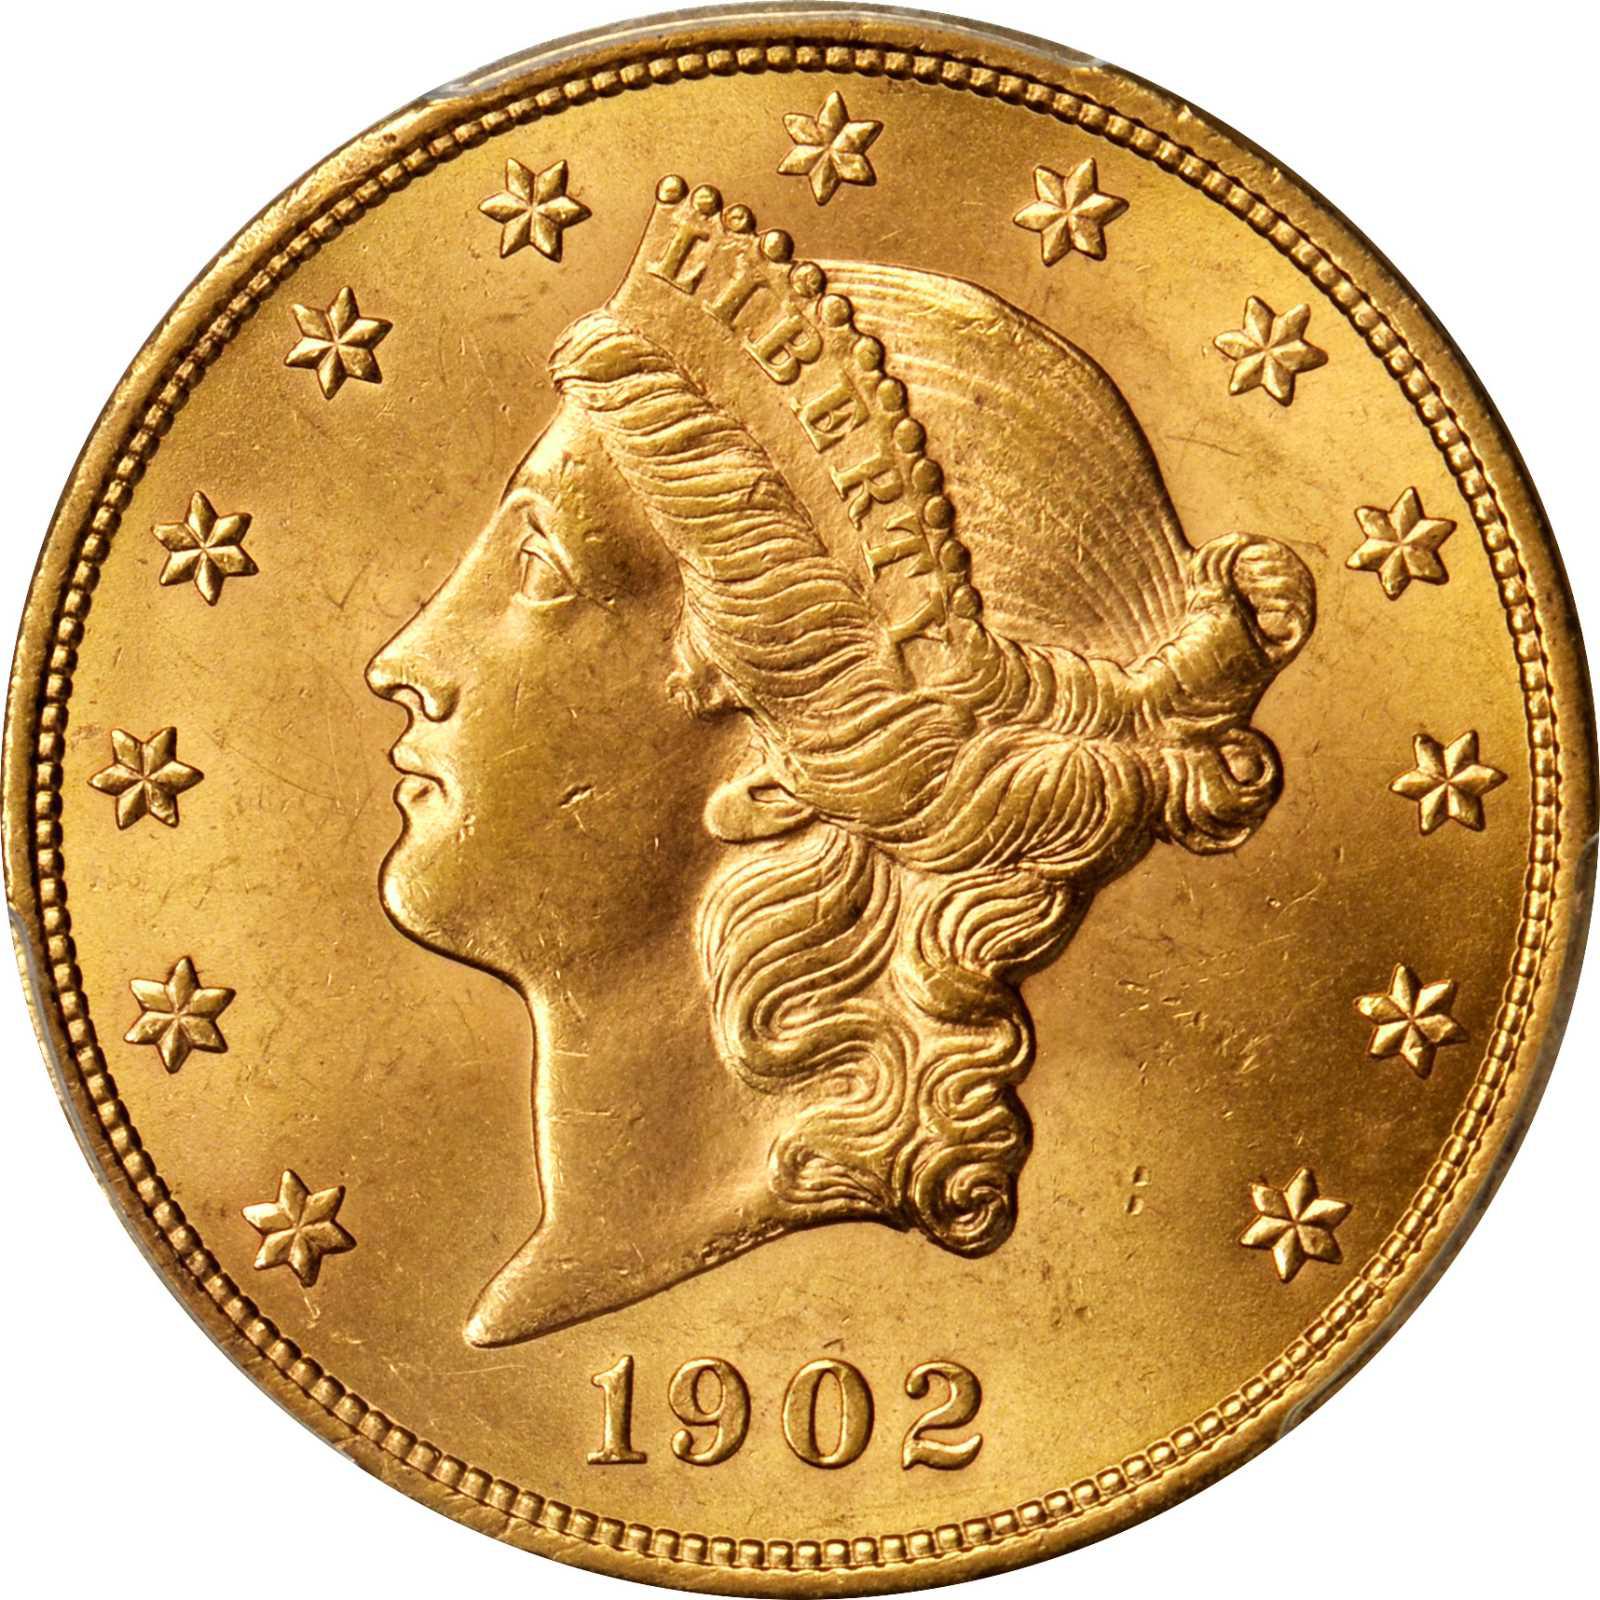 How Much Is A 1908 20 Dollar Gold Liberty Coin Worth